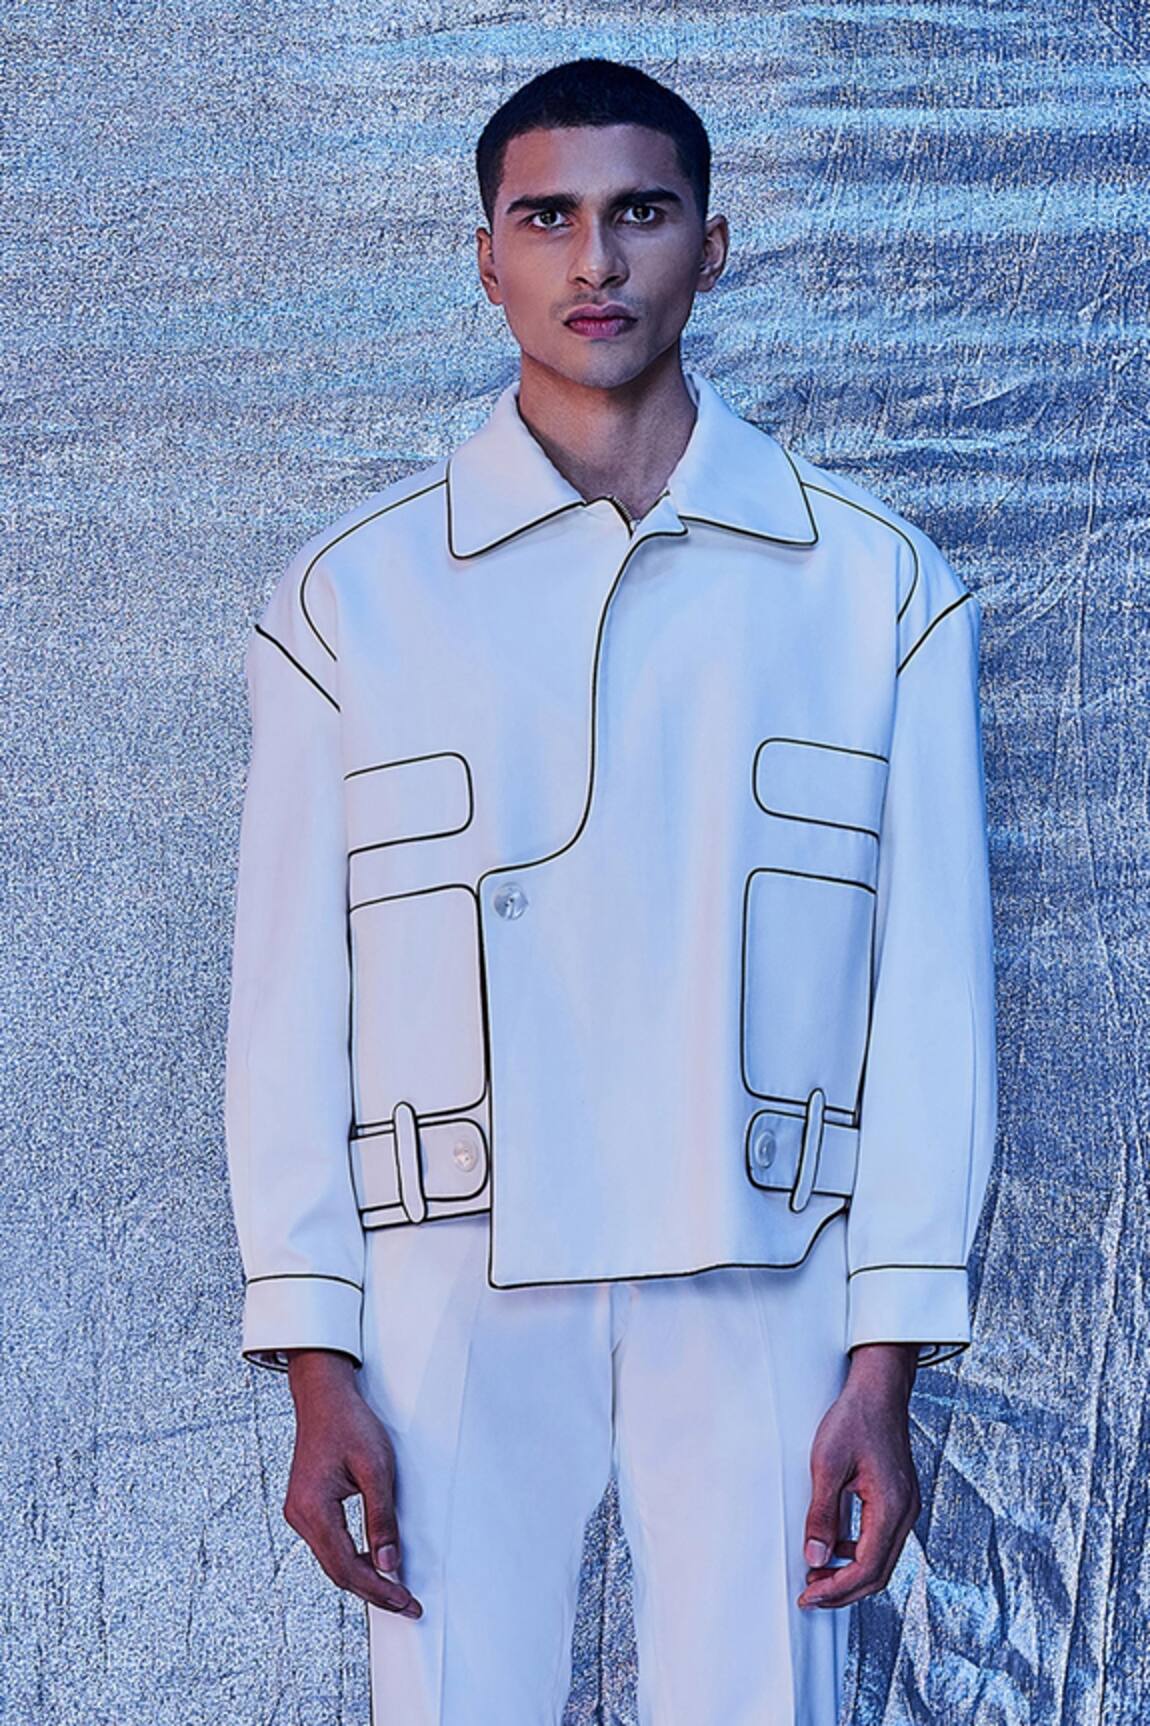 Off-White Bomber Jacket with Patches